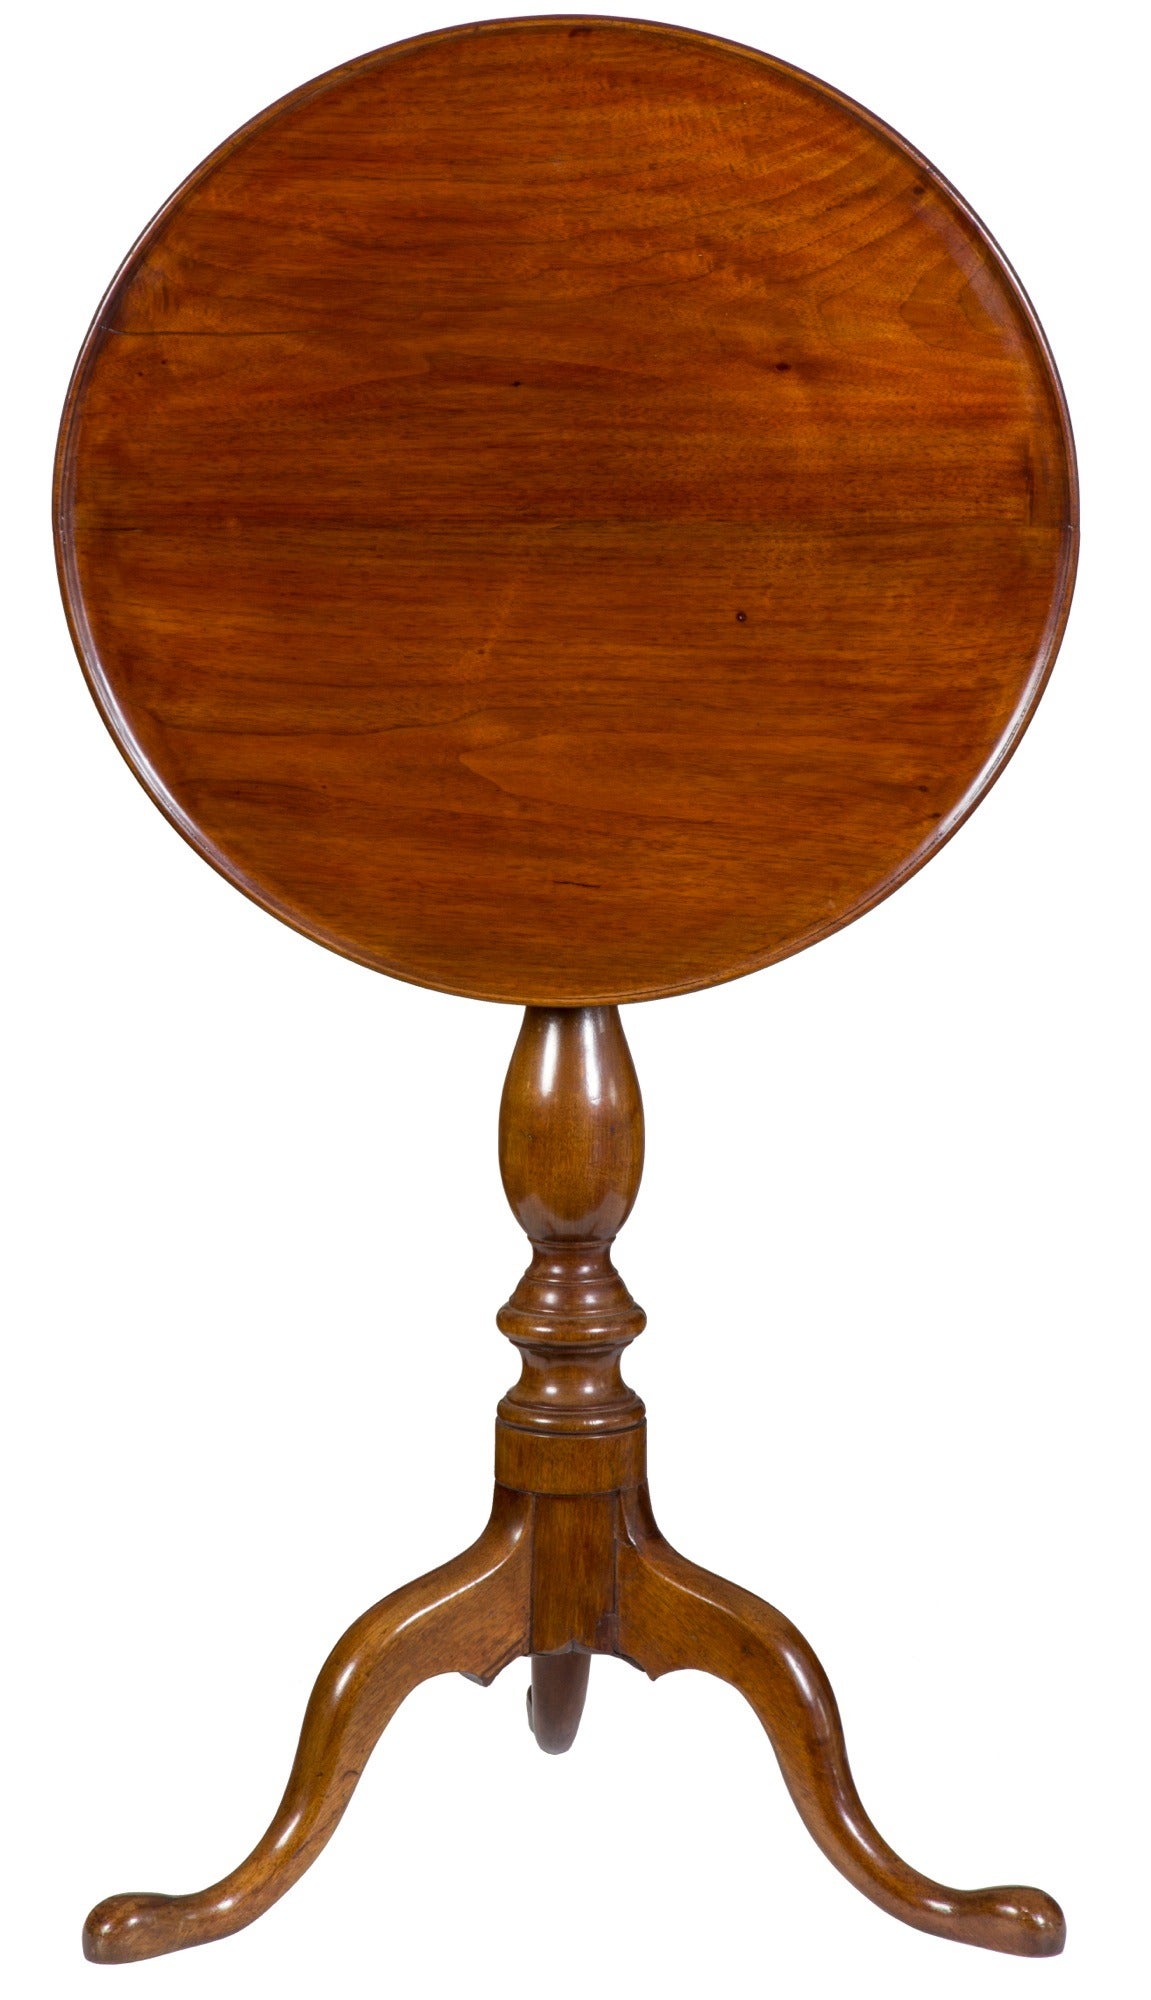 This small tilt-top is an early one, evidenced by its walnut wood choice. It has the desirable dish top and nicely formed cabriole legs. The central support is a traditional baluster, upon an unusually turned base. Small tilt-tops are highly